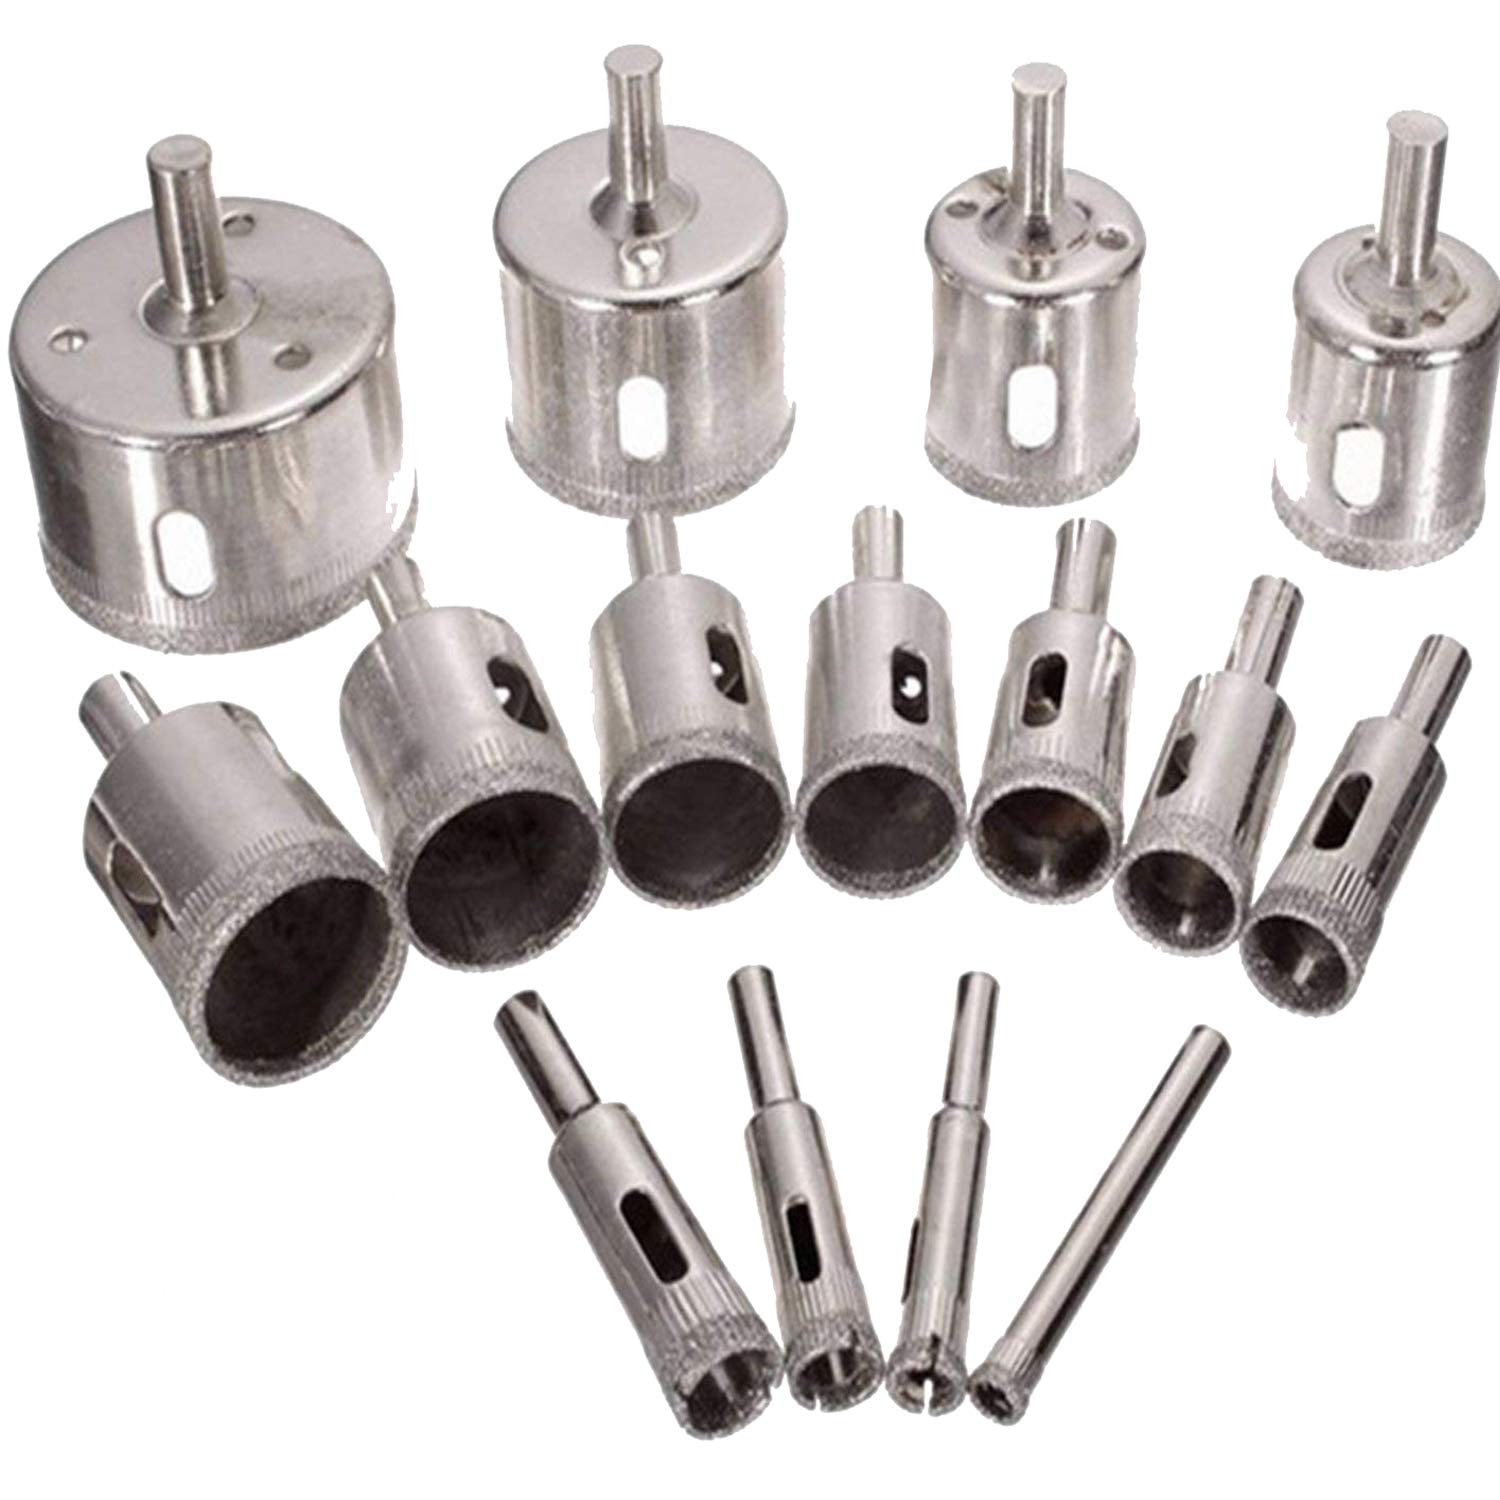 6-50mm Diamond Hole Saw Cutter Drill Bits Hollow Core Extractor Tools 